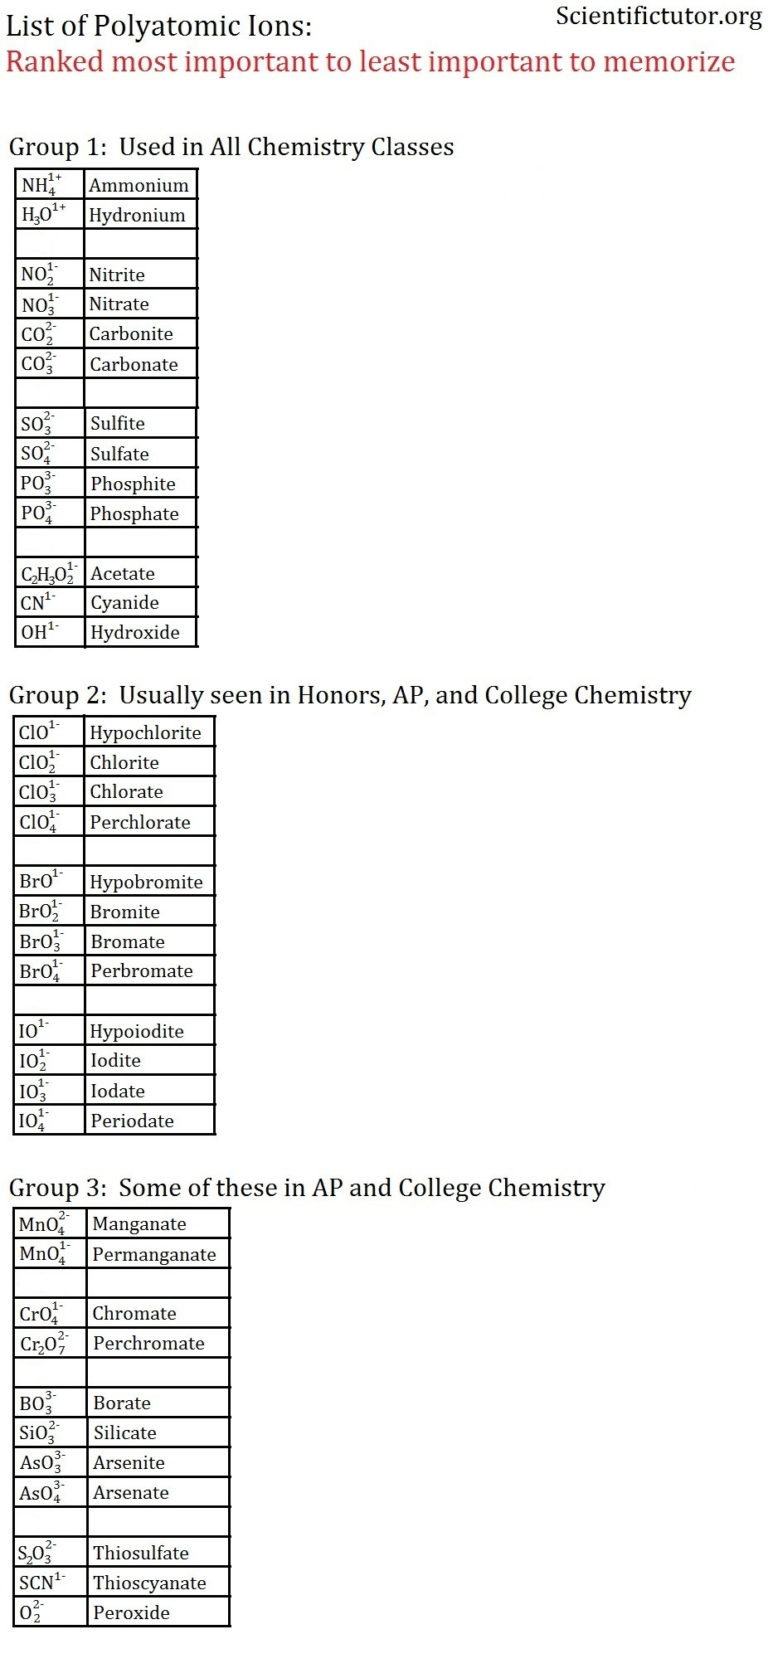 chem-naming-ionic-compounds-with-polyatomic-ions-part-2-db-excel